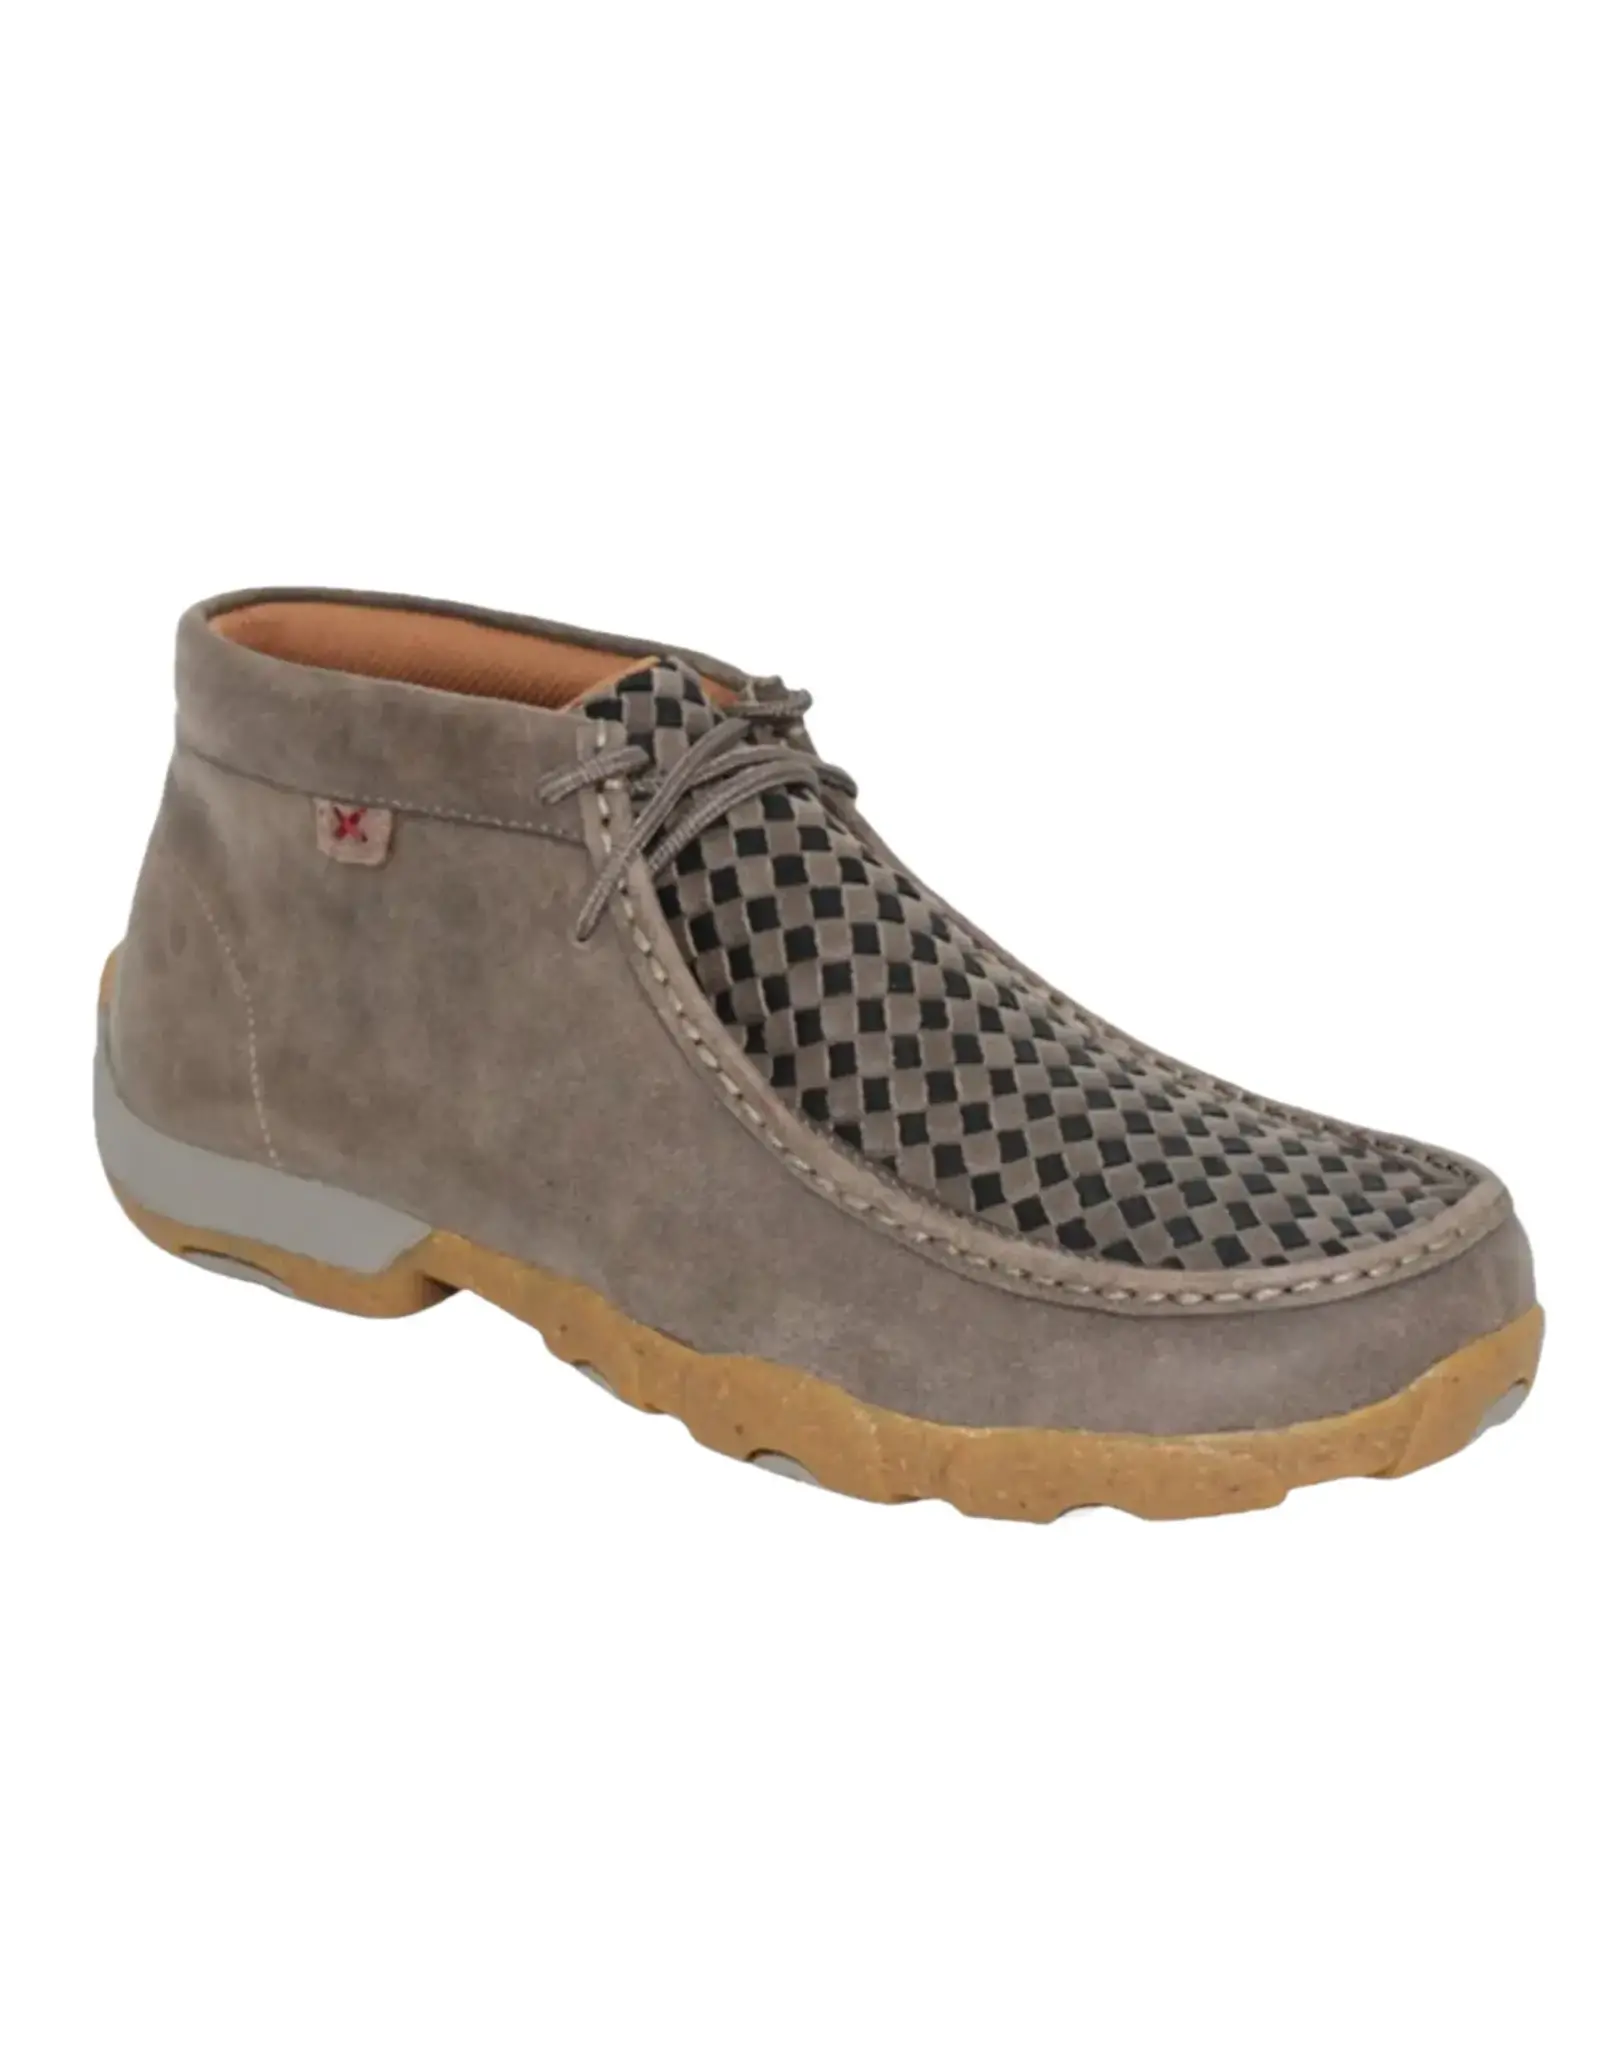 Twisted X Men's Taupe/Grey & Black Basket Woven MDM0097 Driving Moc